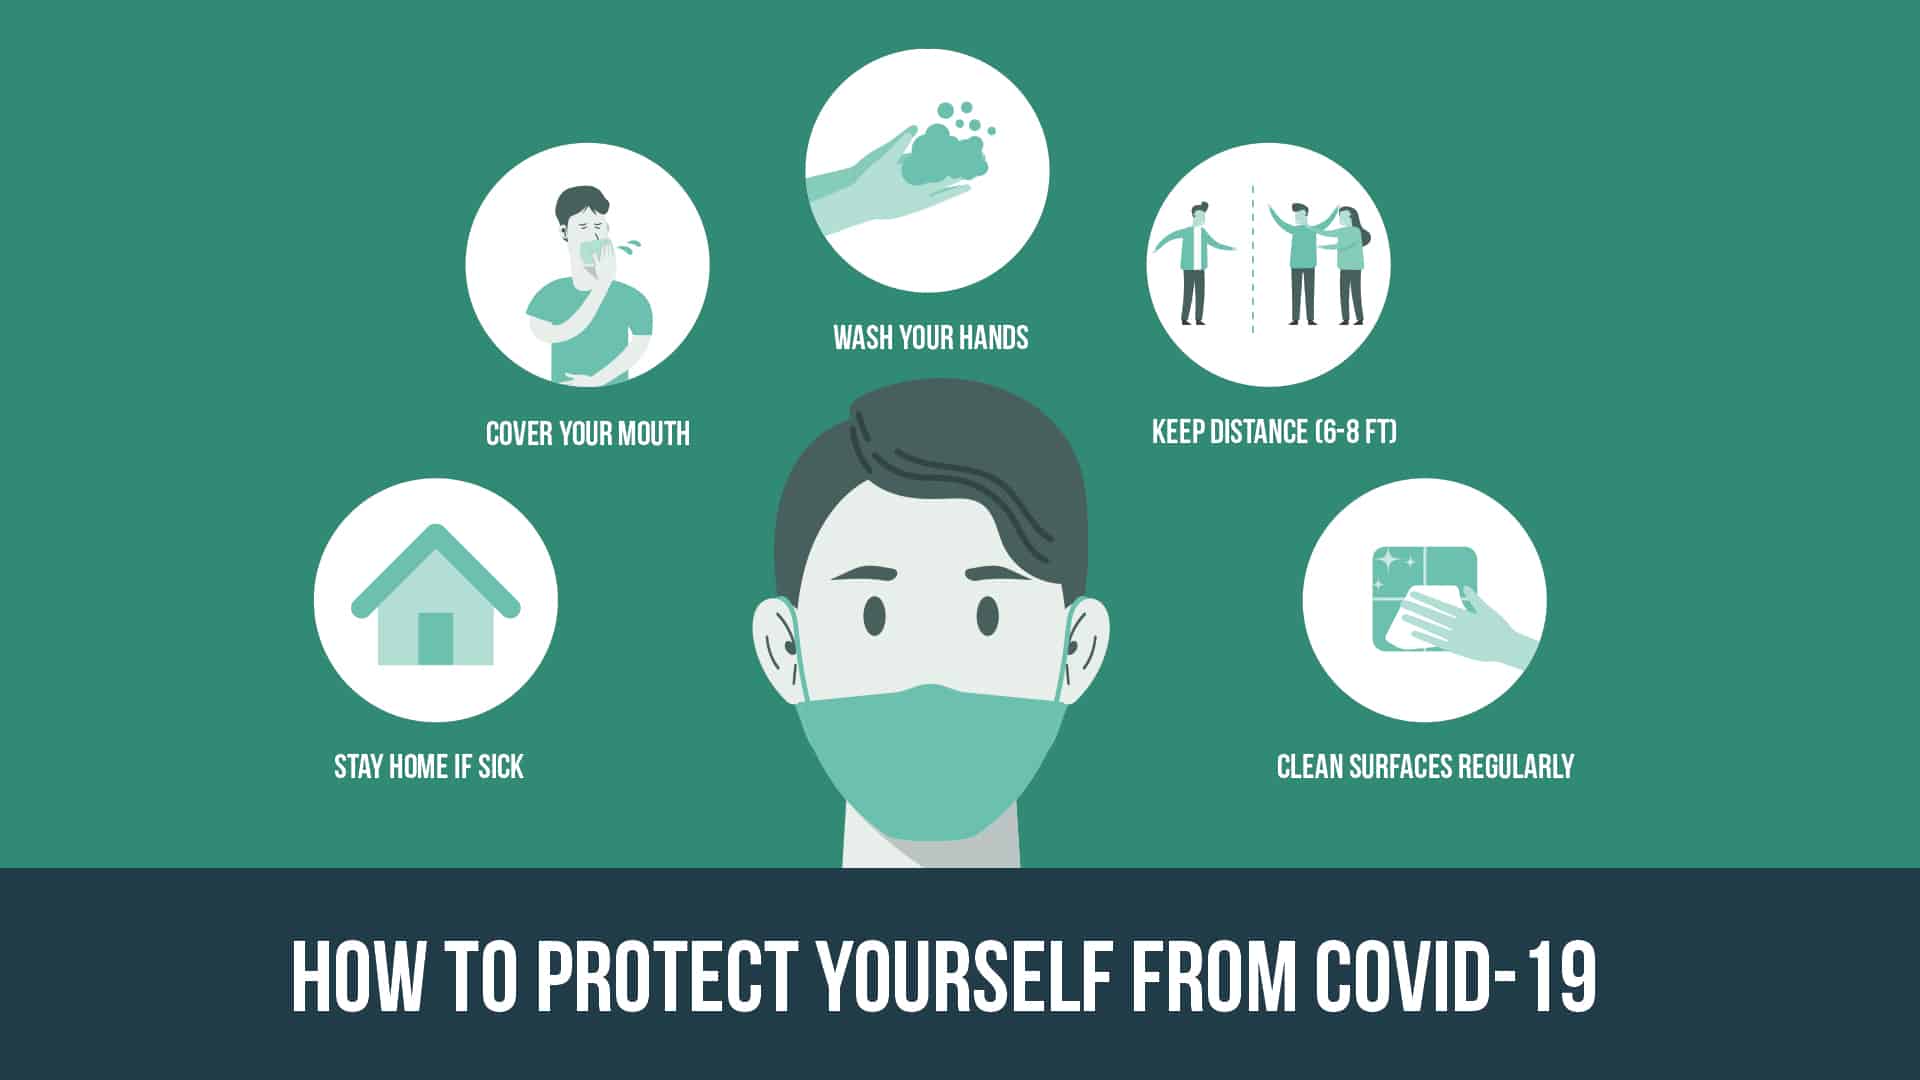 SD - How to Protect Yourself from Covid-19 16 x 9 Decal - 2 pack